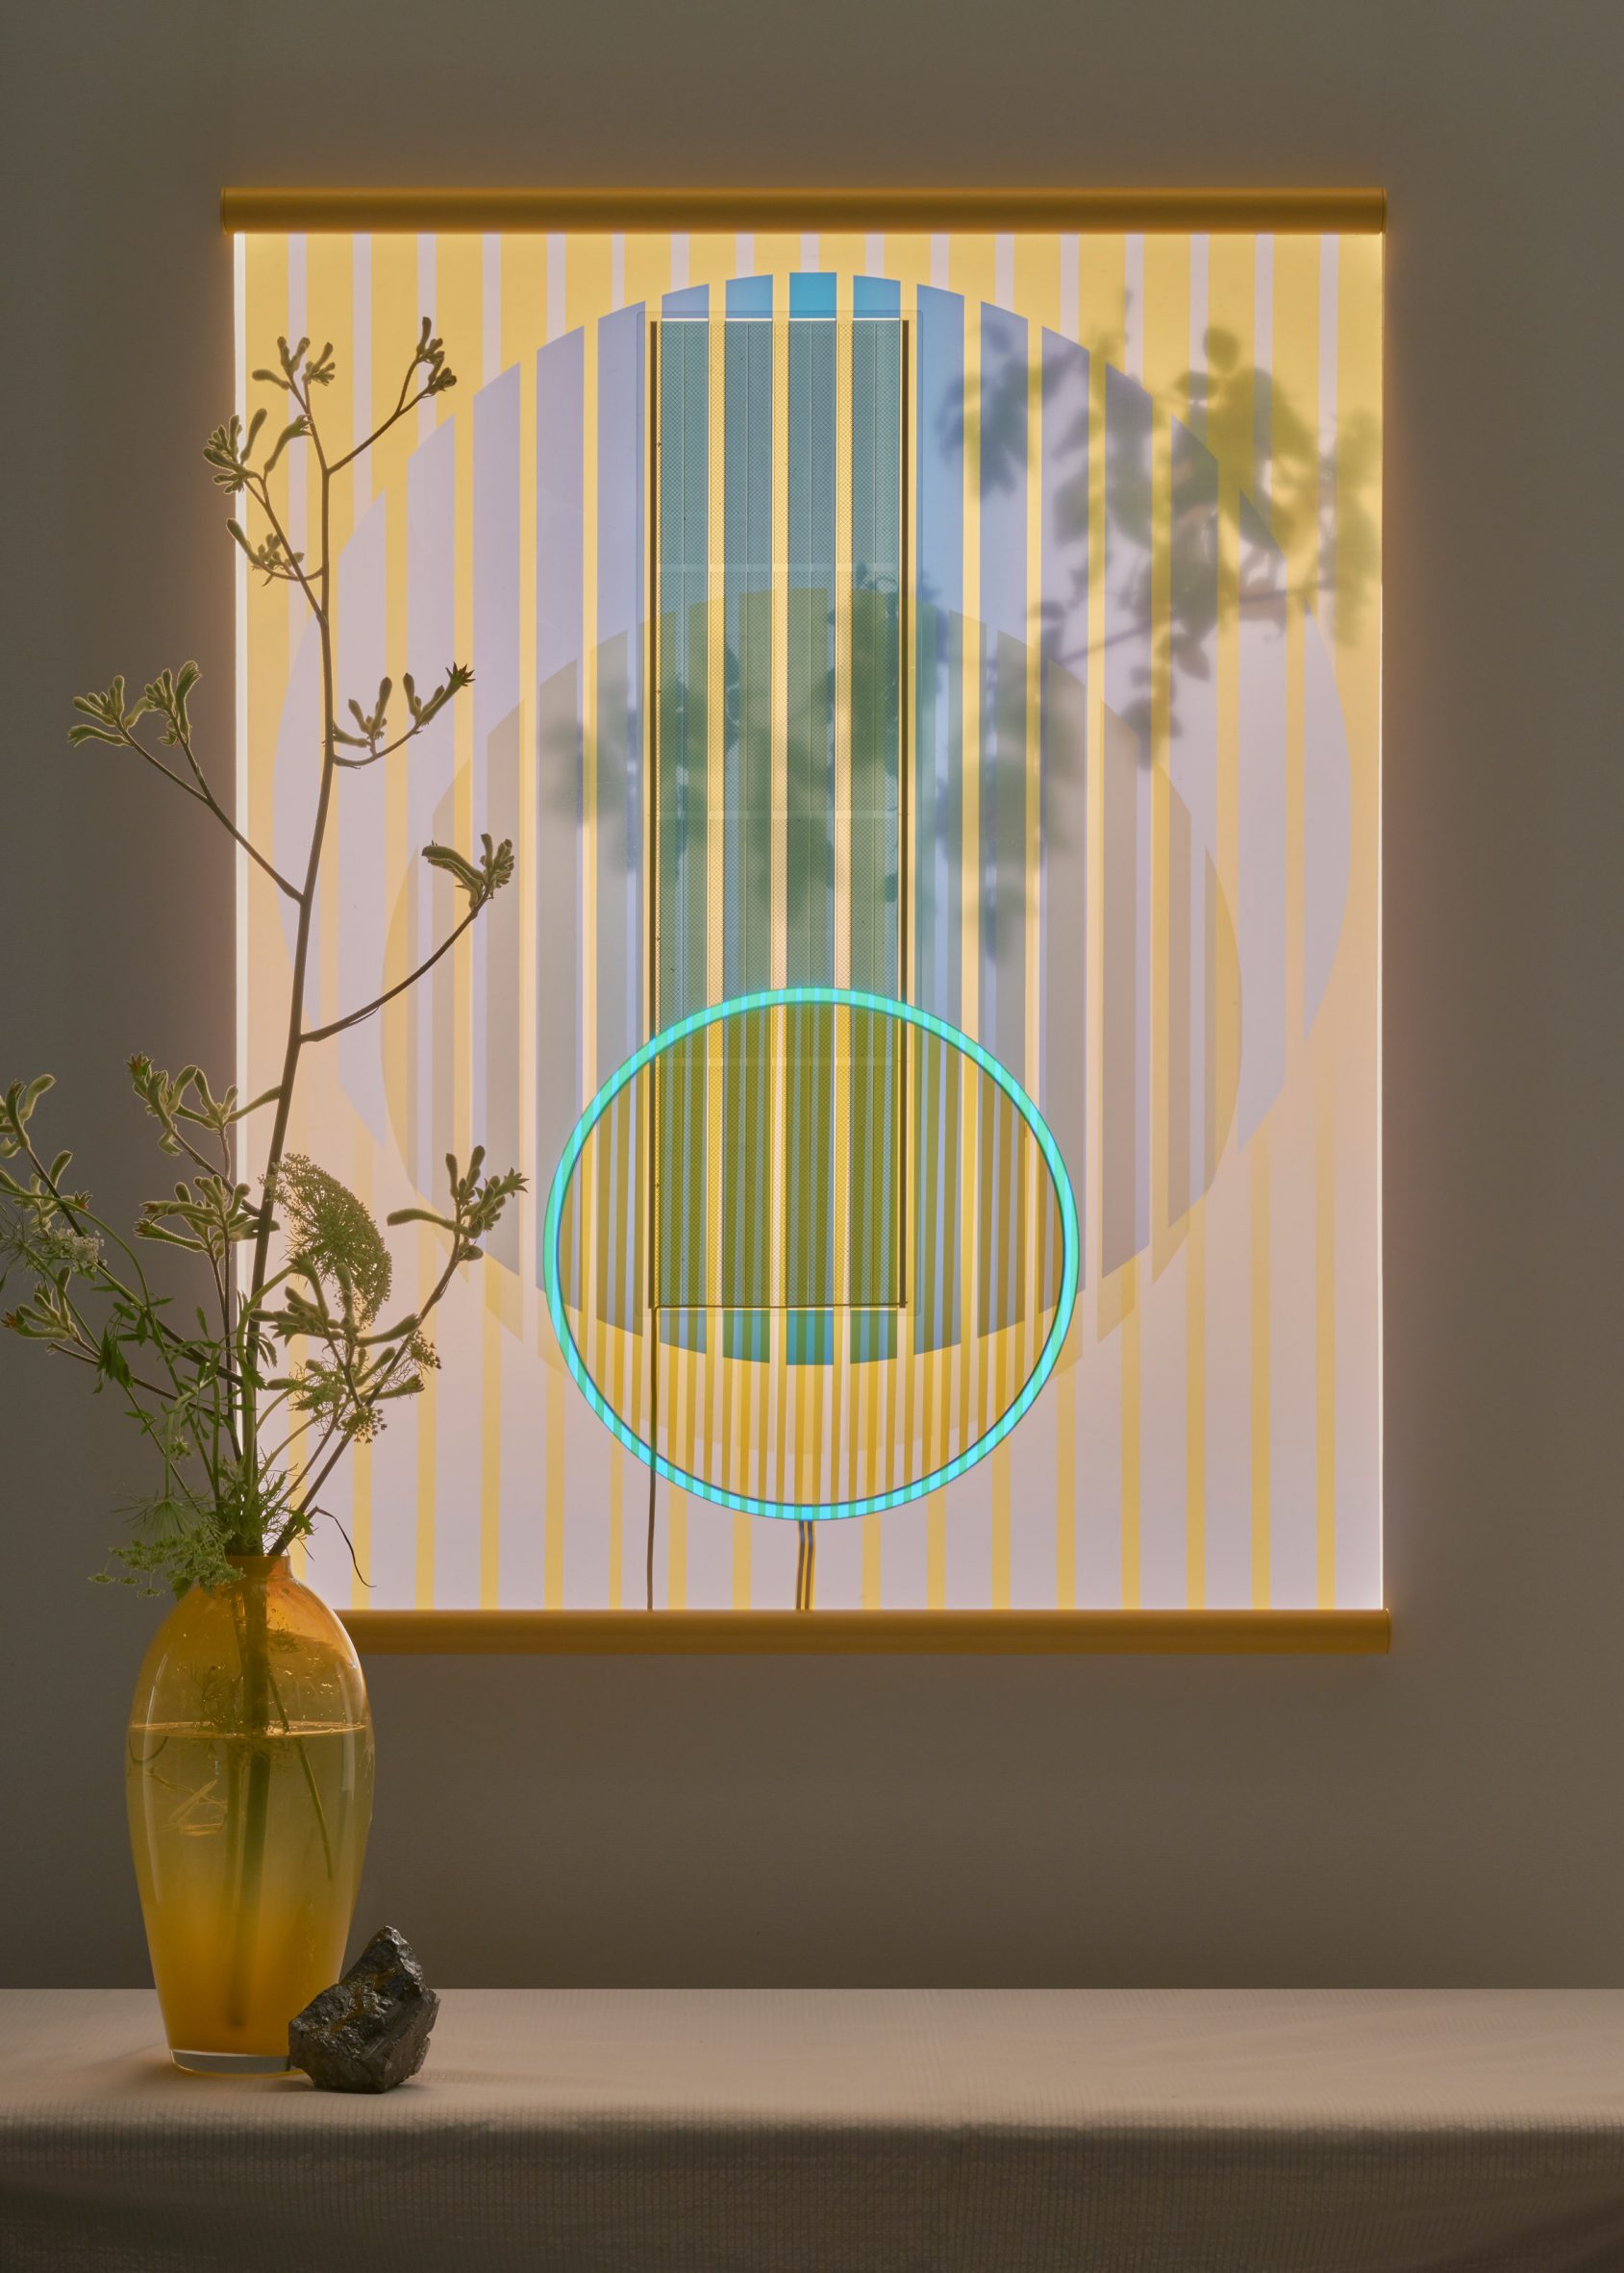 Wallhanging made from solar panels by Marjan van Aubel pictured at dusk, hung behind a vase with flowers